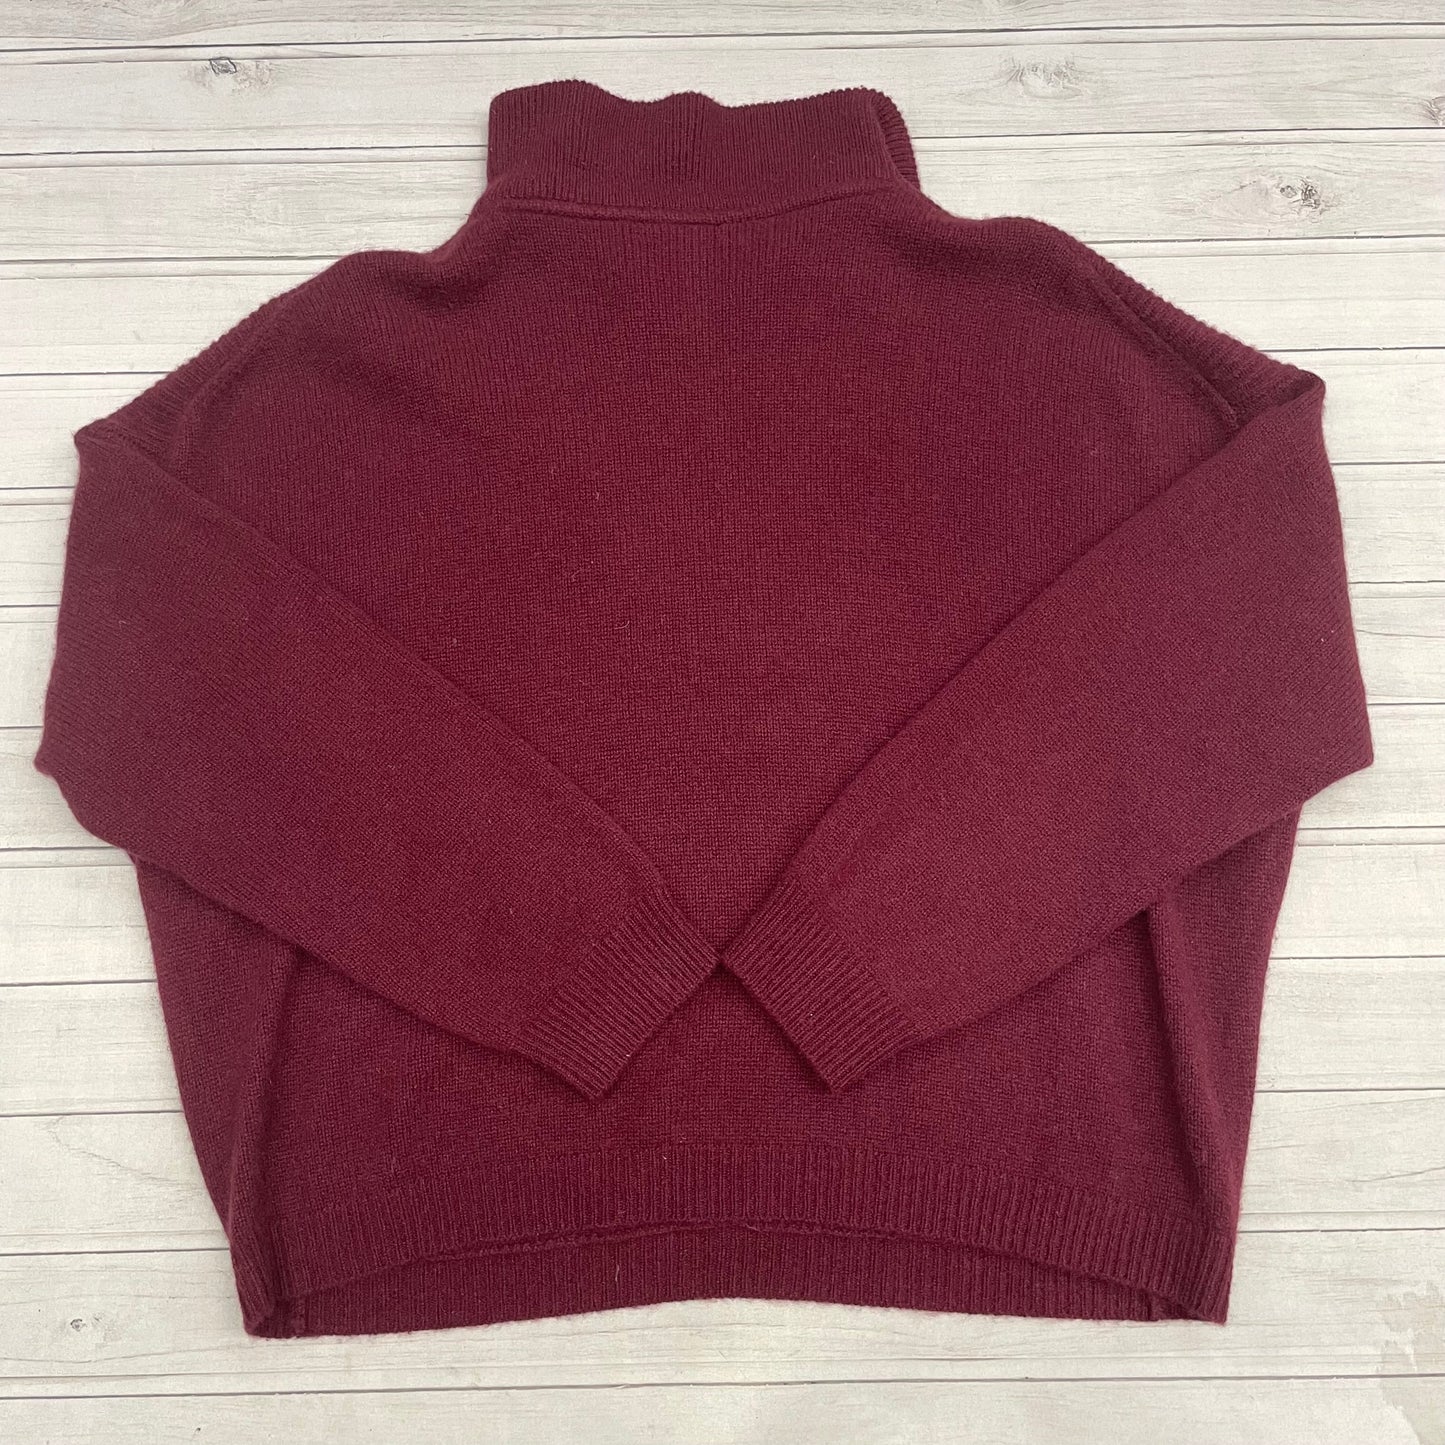 Sweater Cashmere By Saks Fifth Avenue  Size: Xl